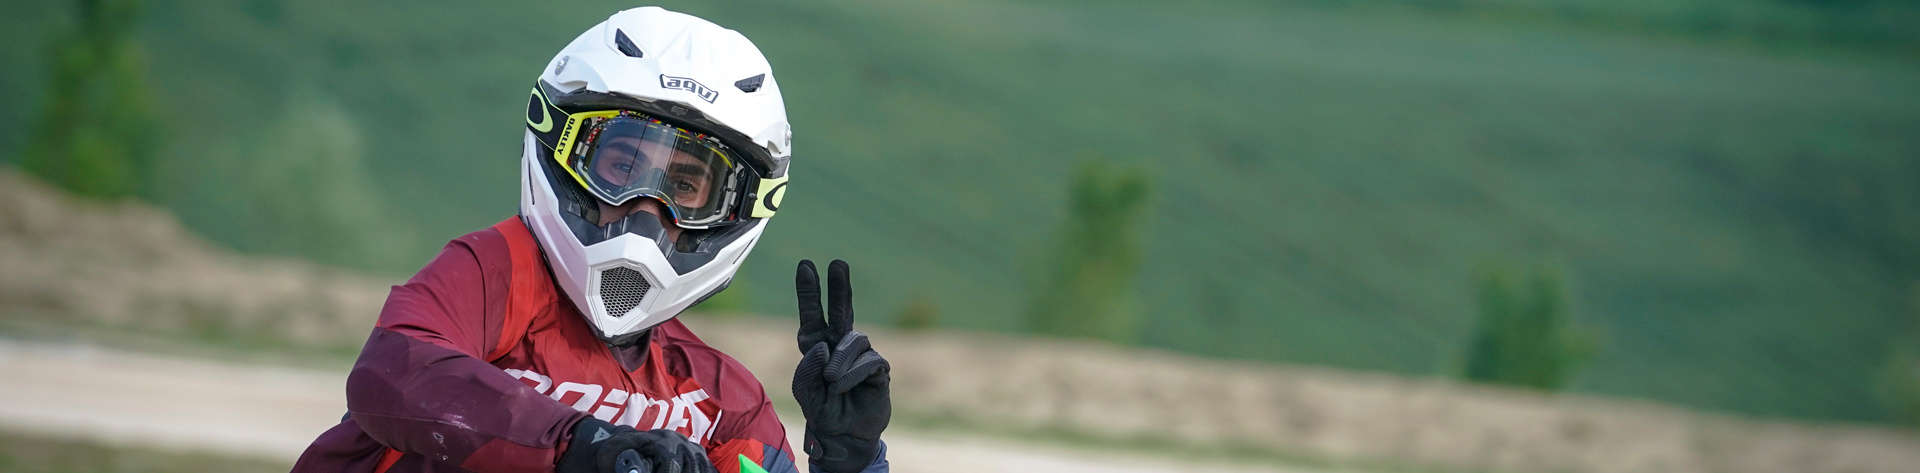 AGV Riding style - Off-road